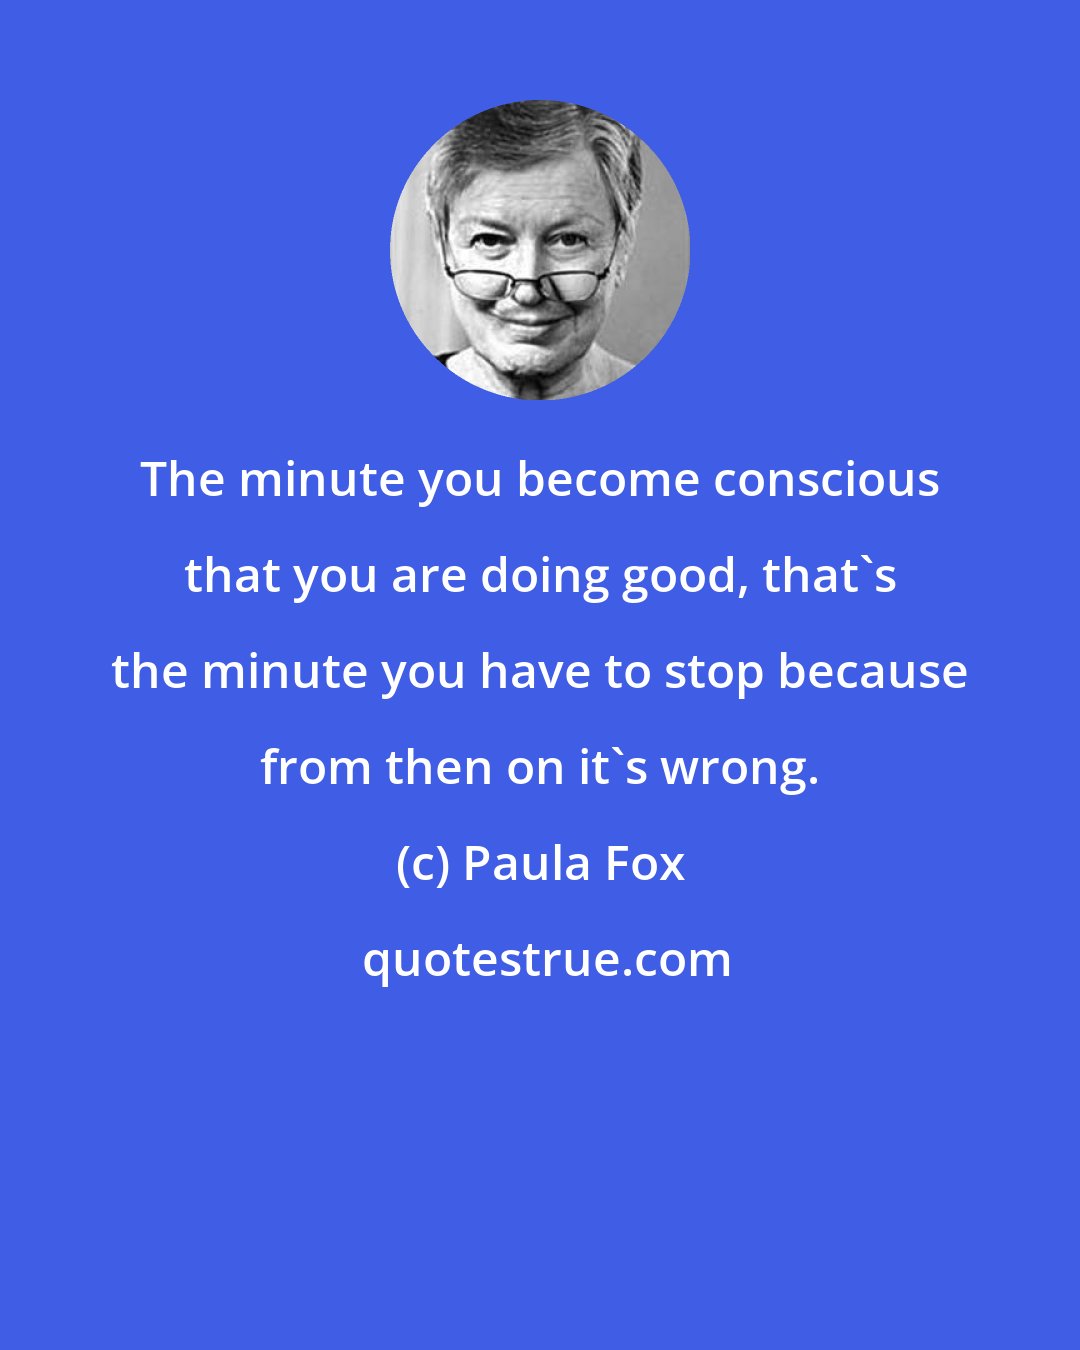 Paula Fox: The minute you become conscious that you are doing good, that's the minute you have to stop because from then on it's wrong.